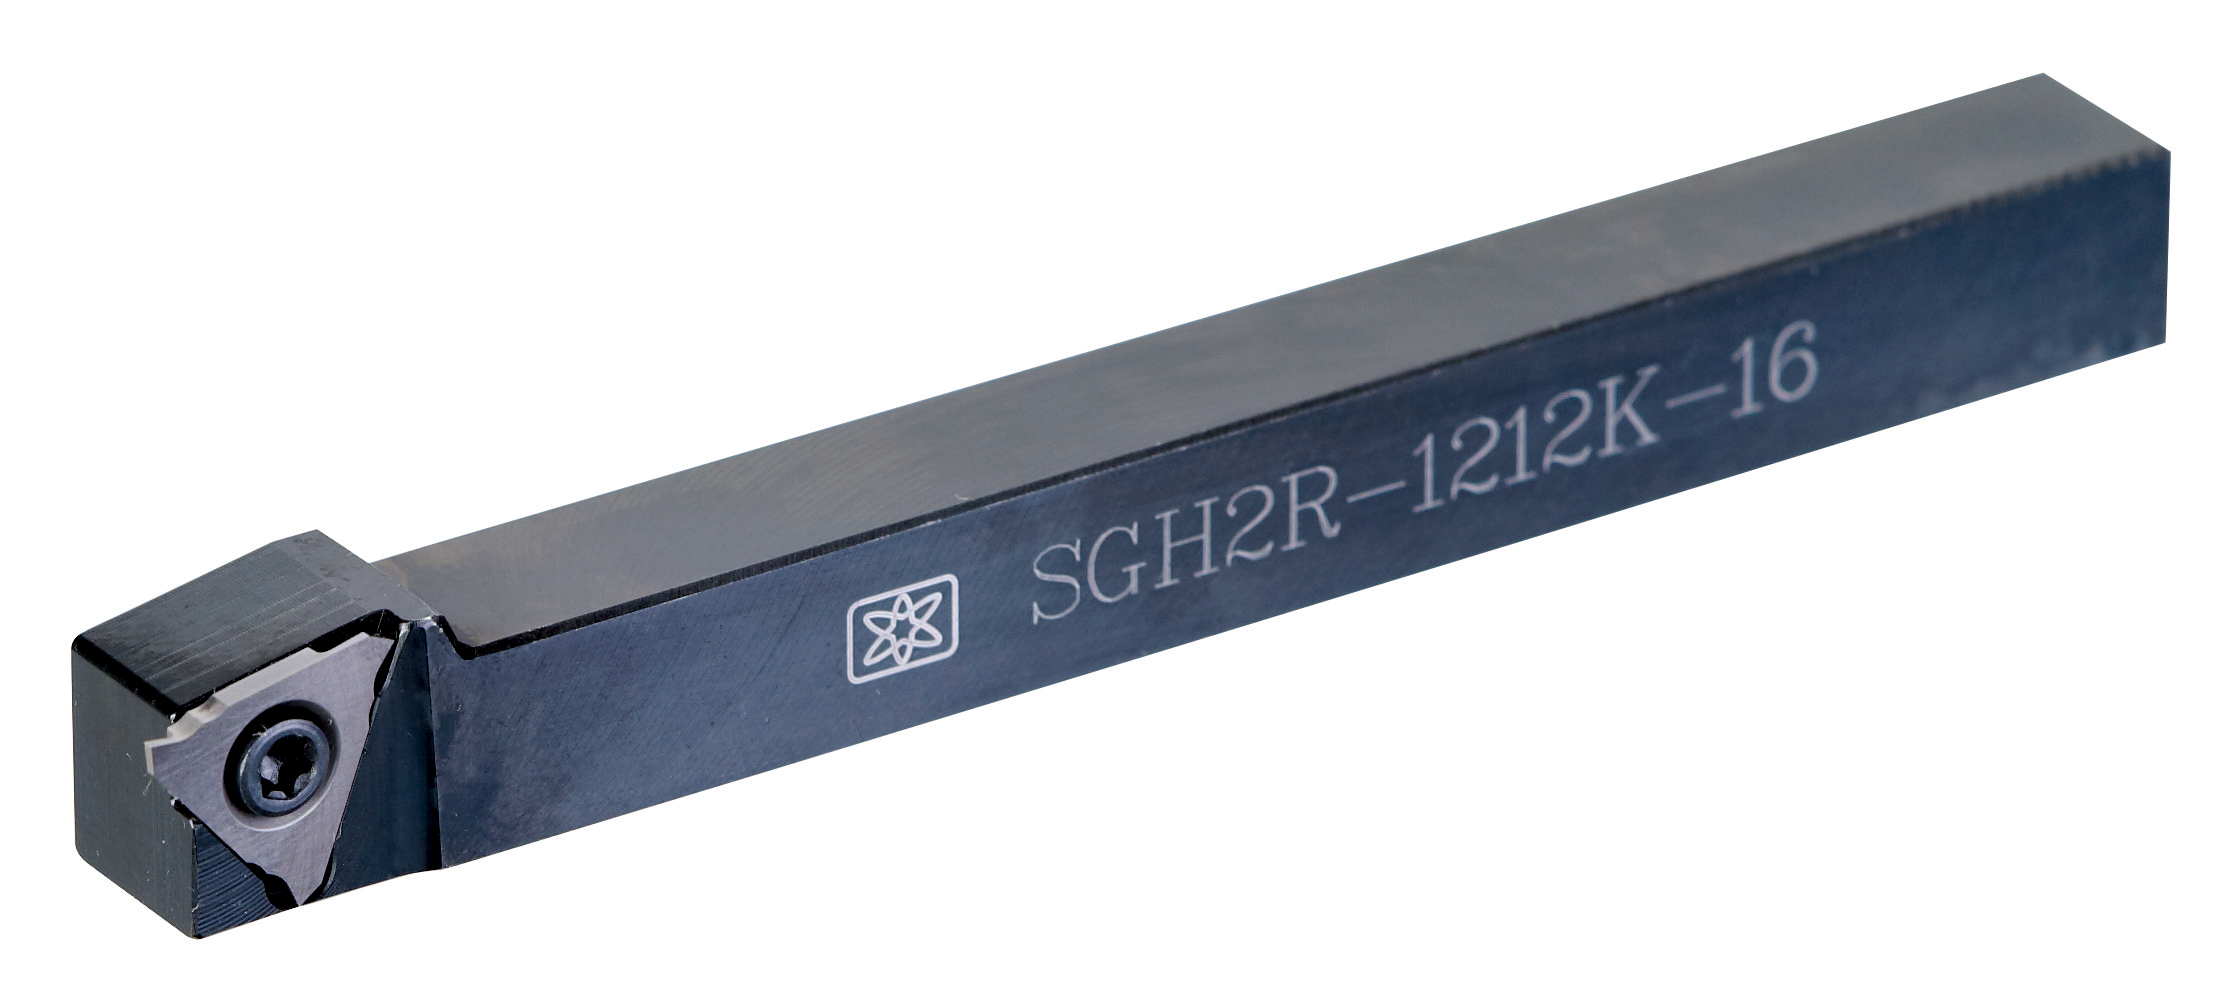 Products|SGH2R (SMG/TTR16...) 外徑切槽刀